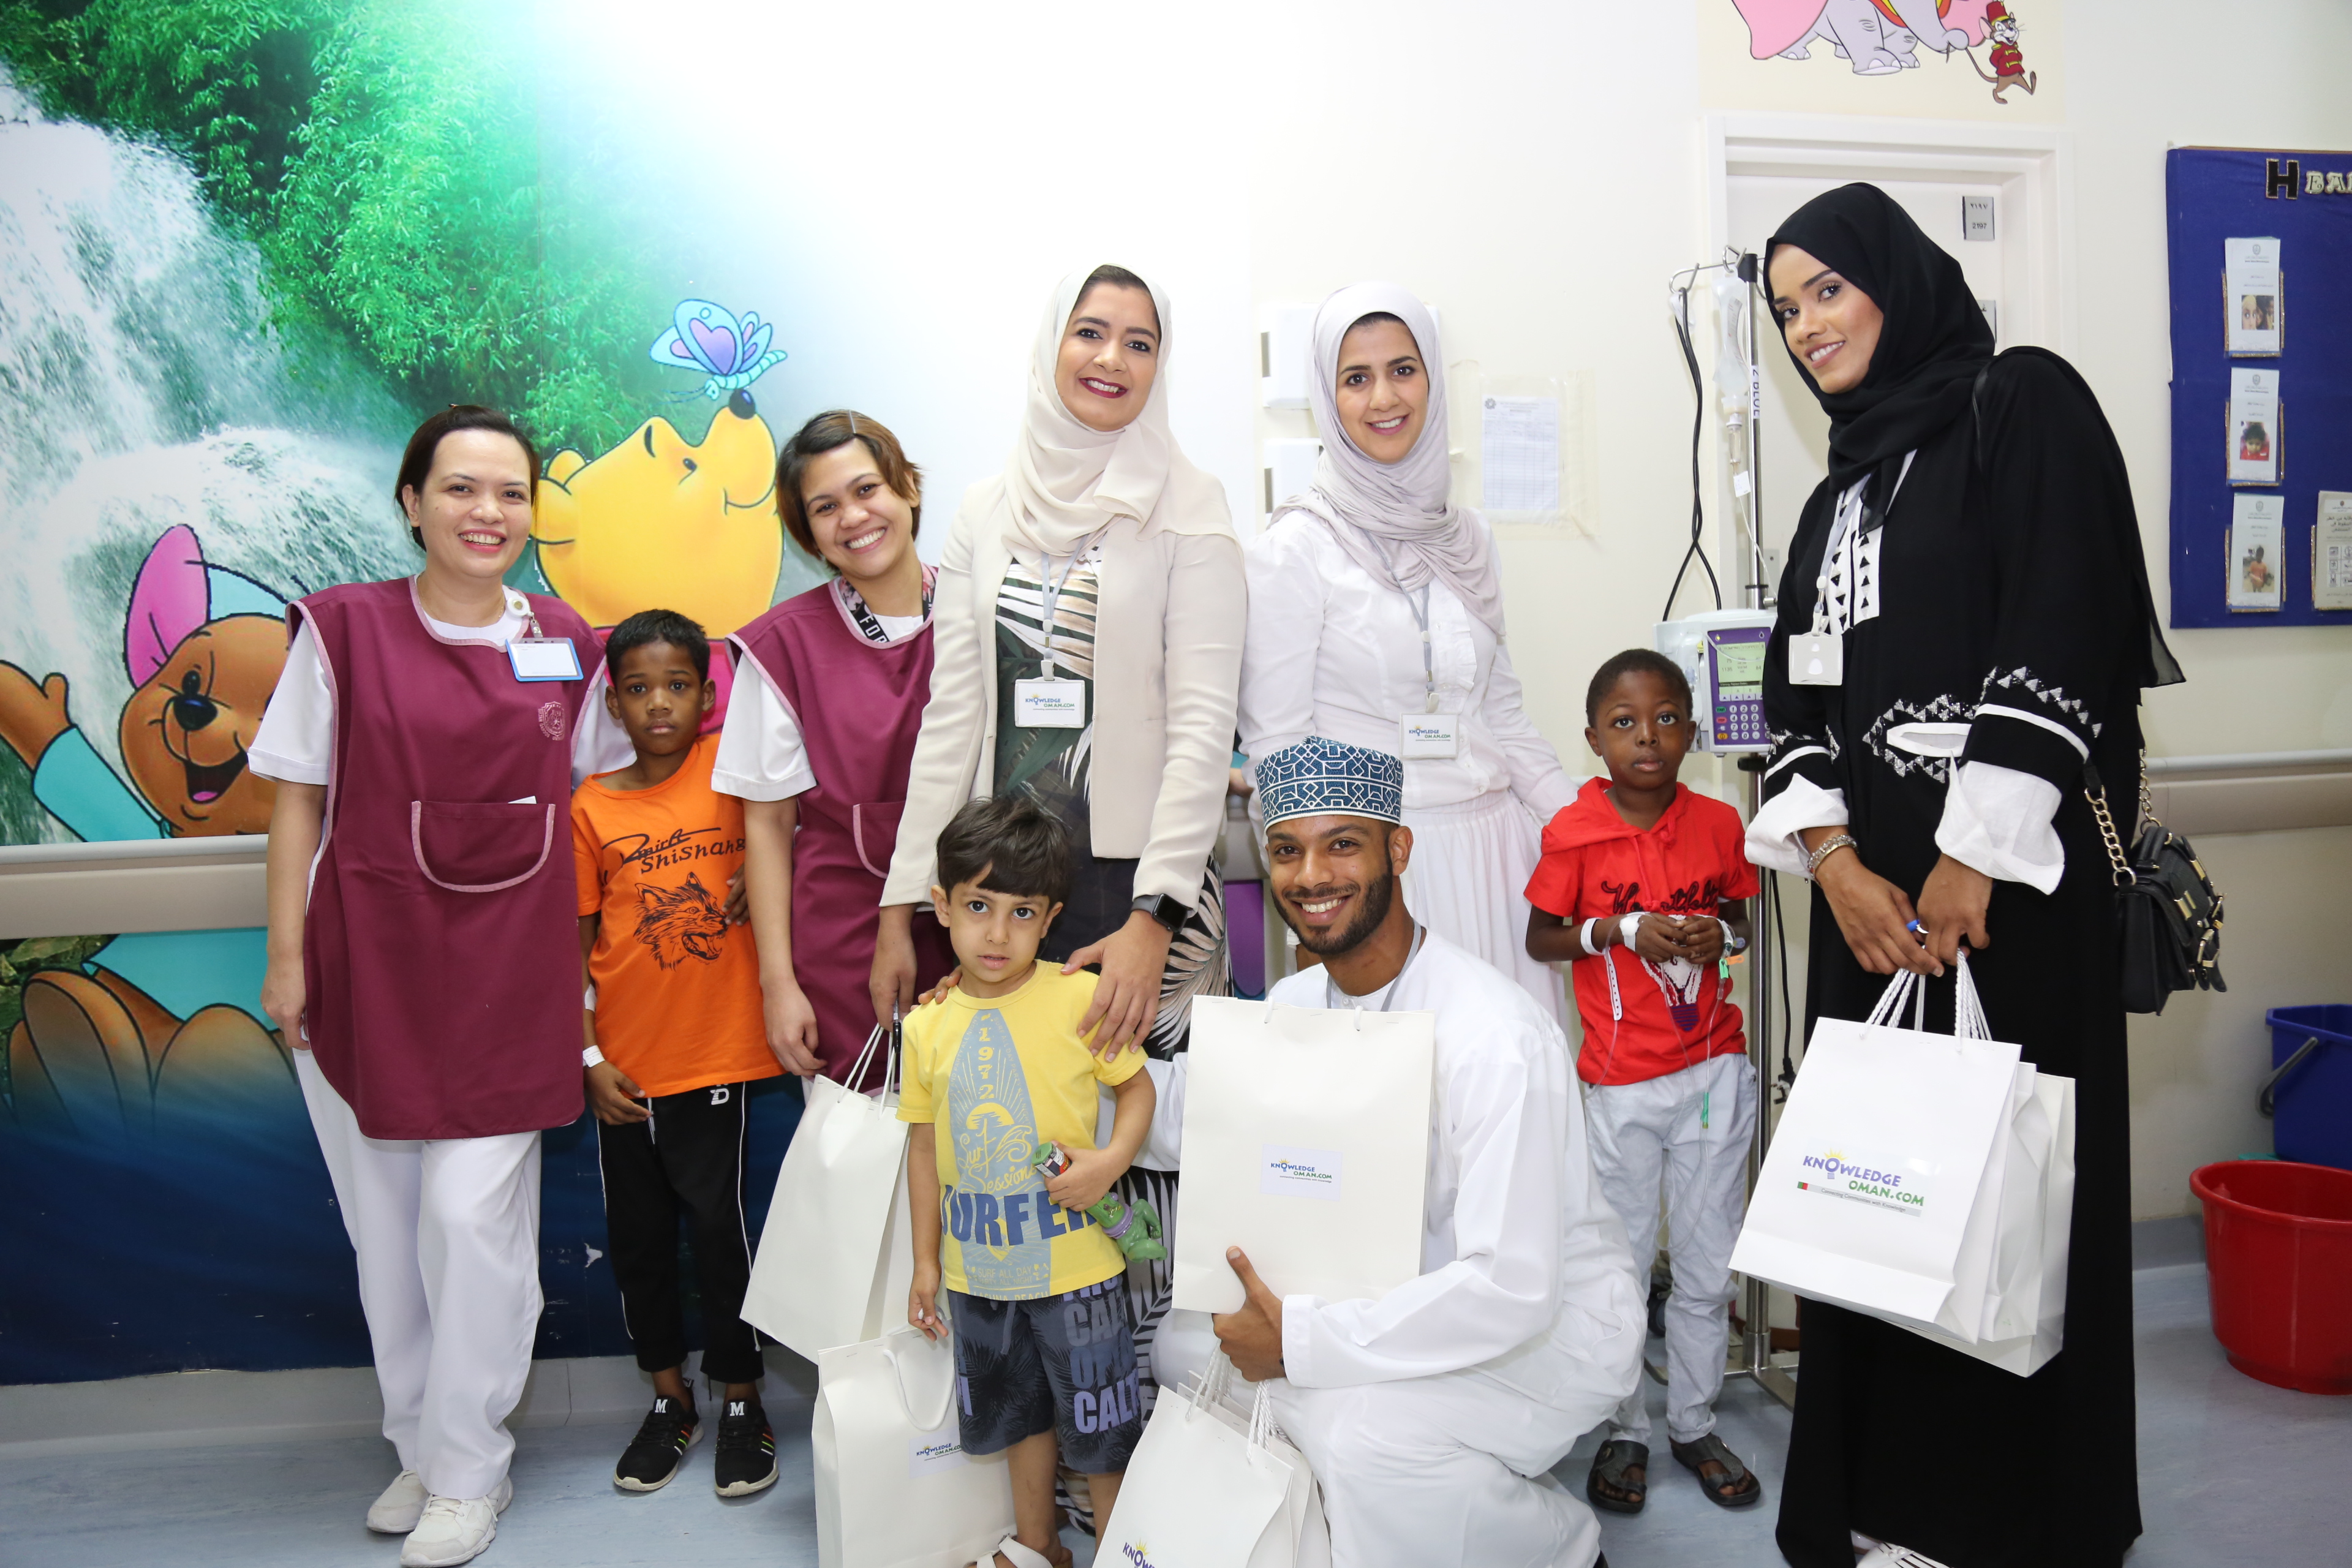 A pledge to help the needy, build better Oman